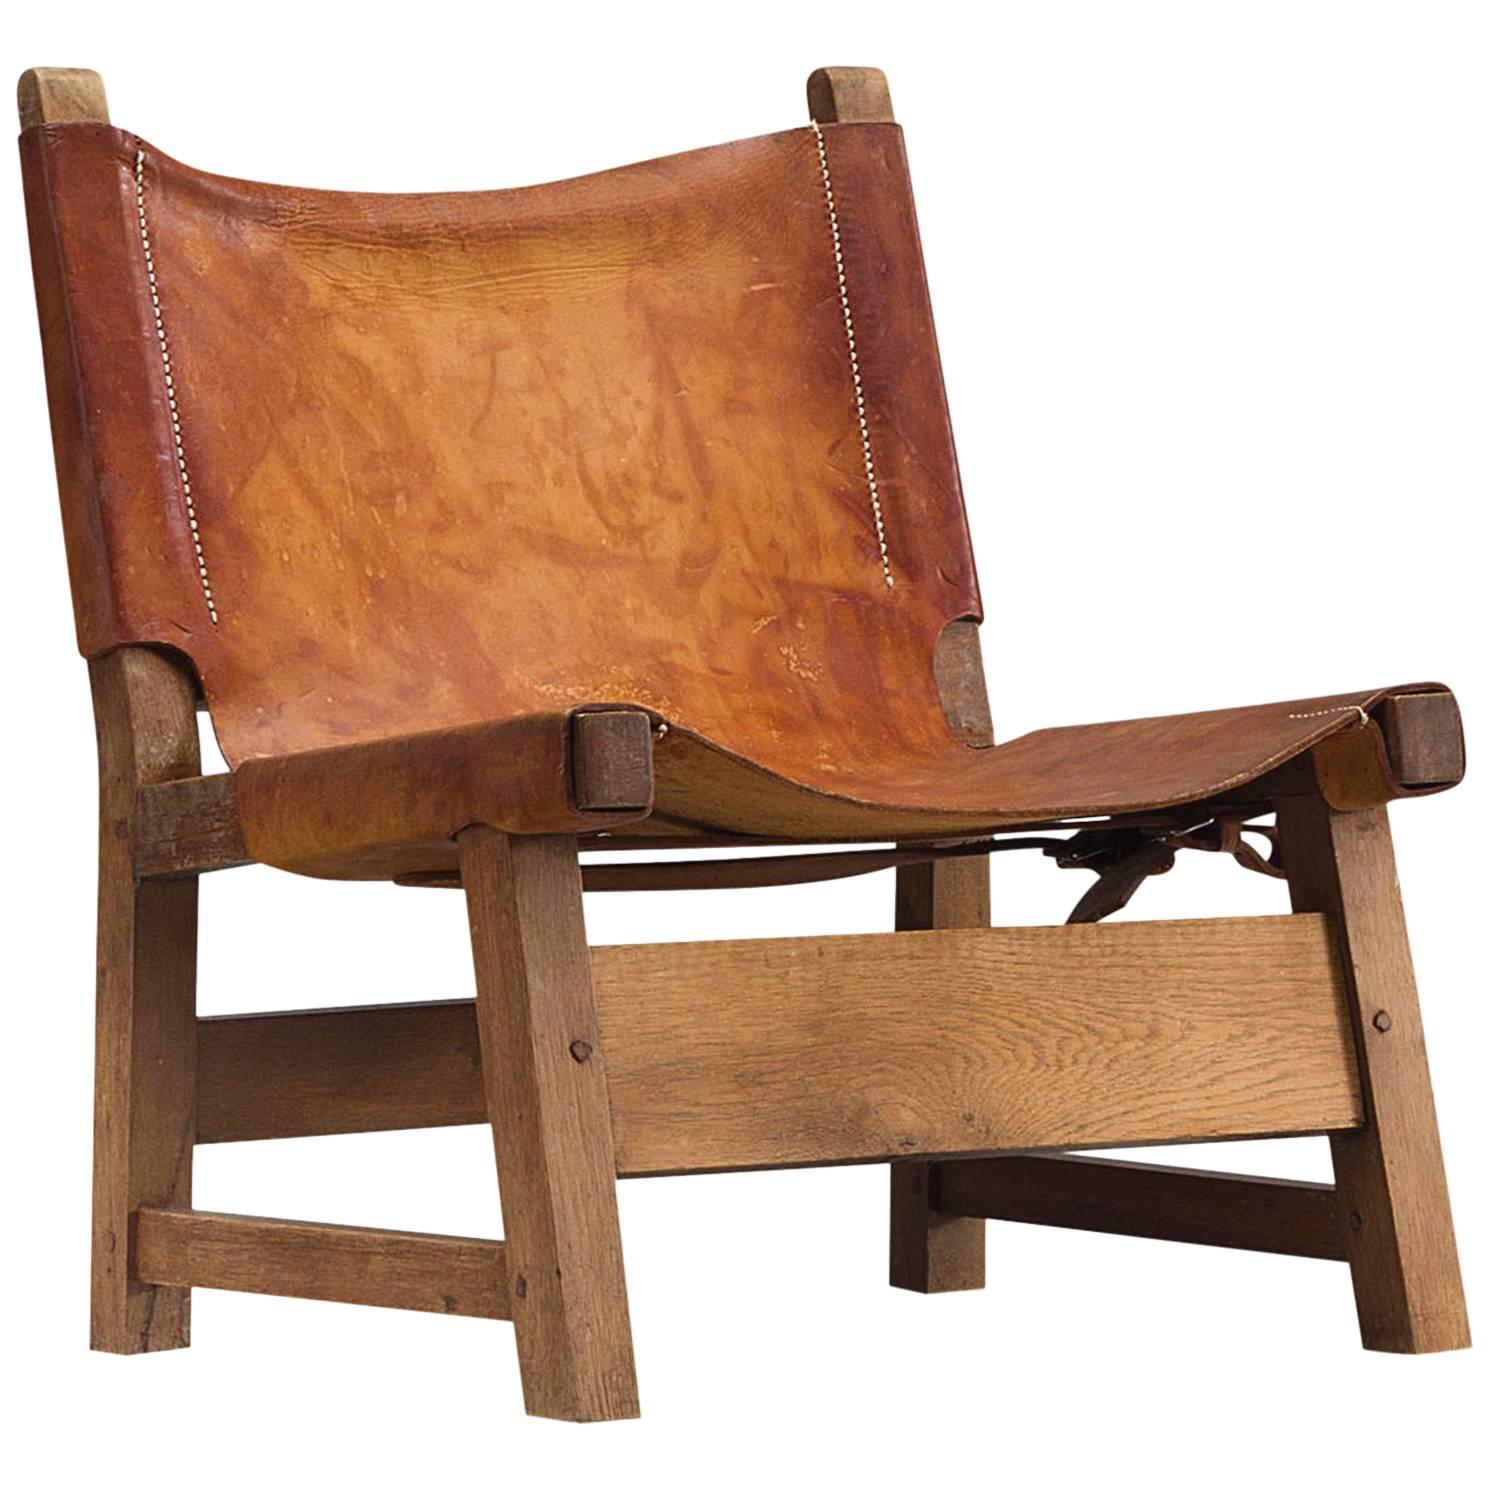 Danish Hunting Chair with Patinated Cognac Leather 